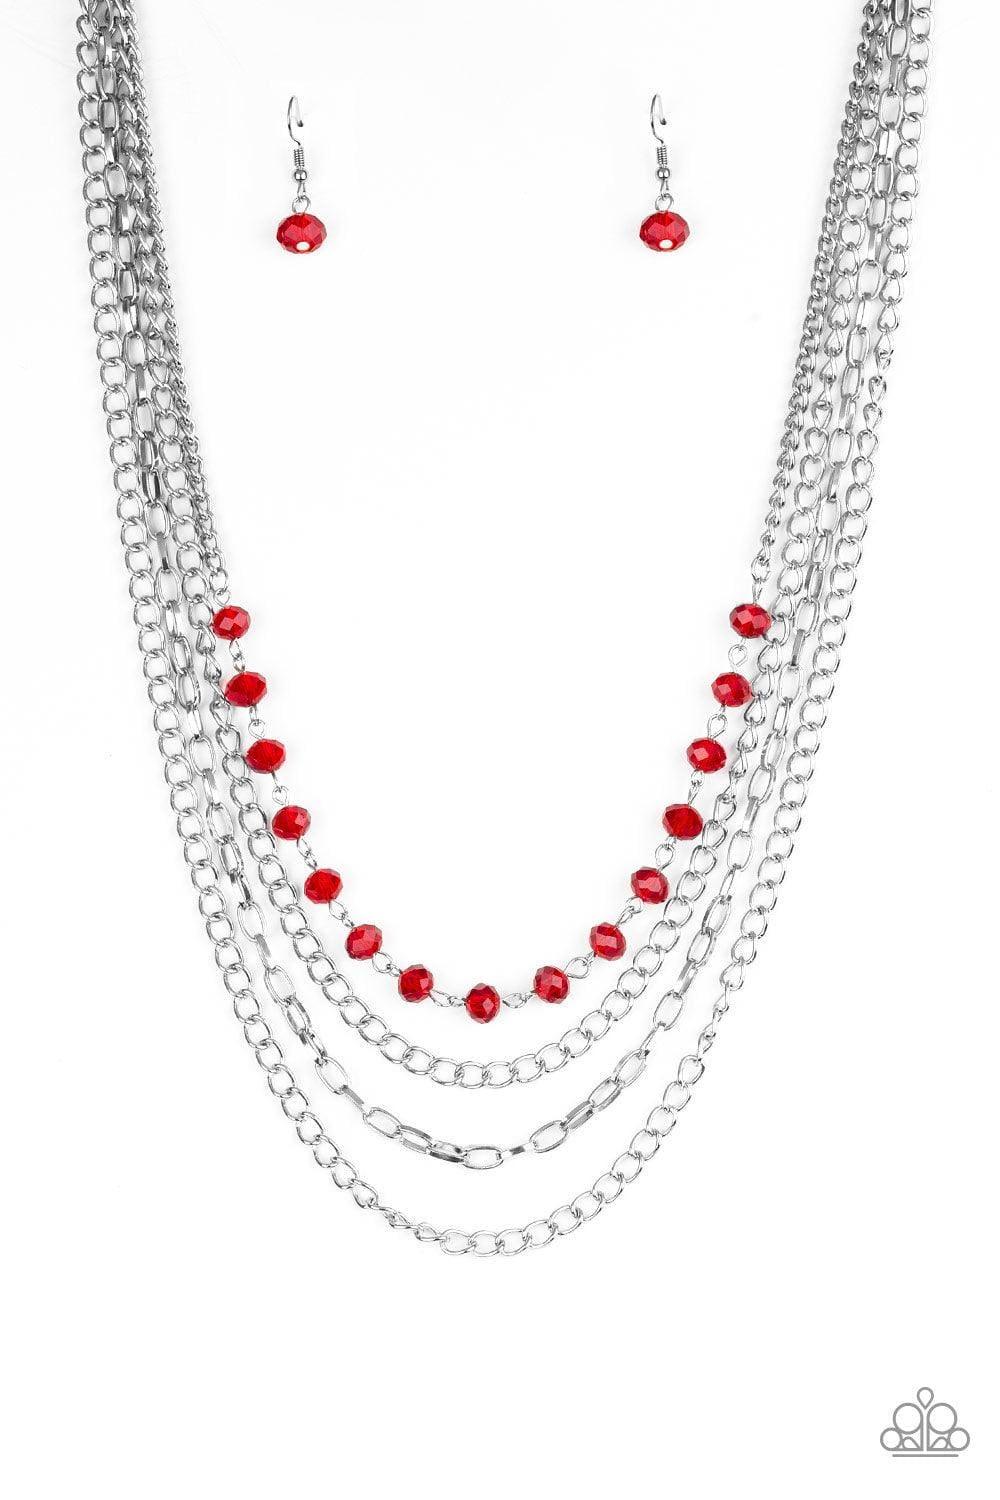 Paparazzi Accessories - Extravagant Elegance - Red Necklace - Bling by JessieK